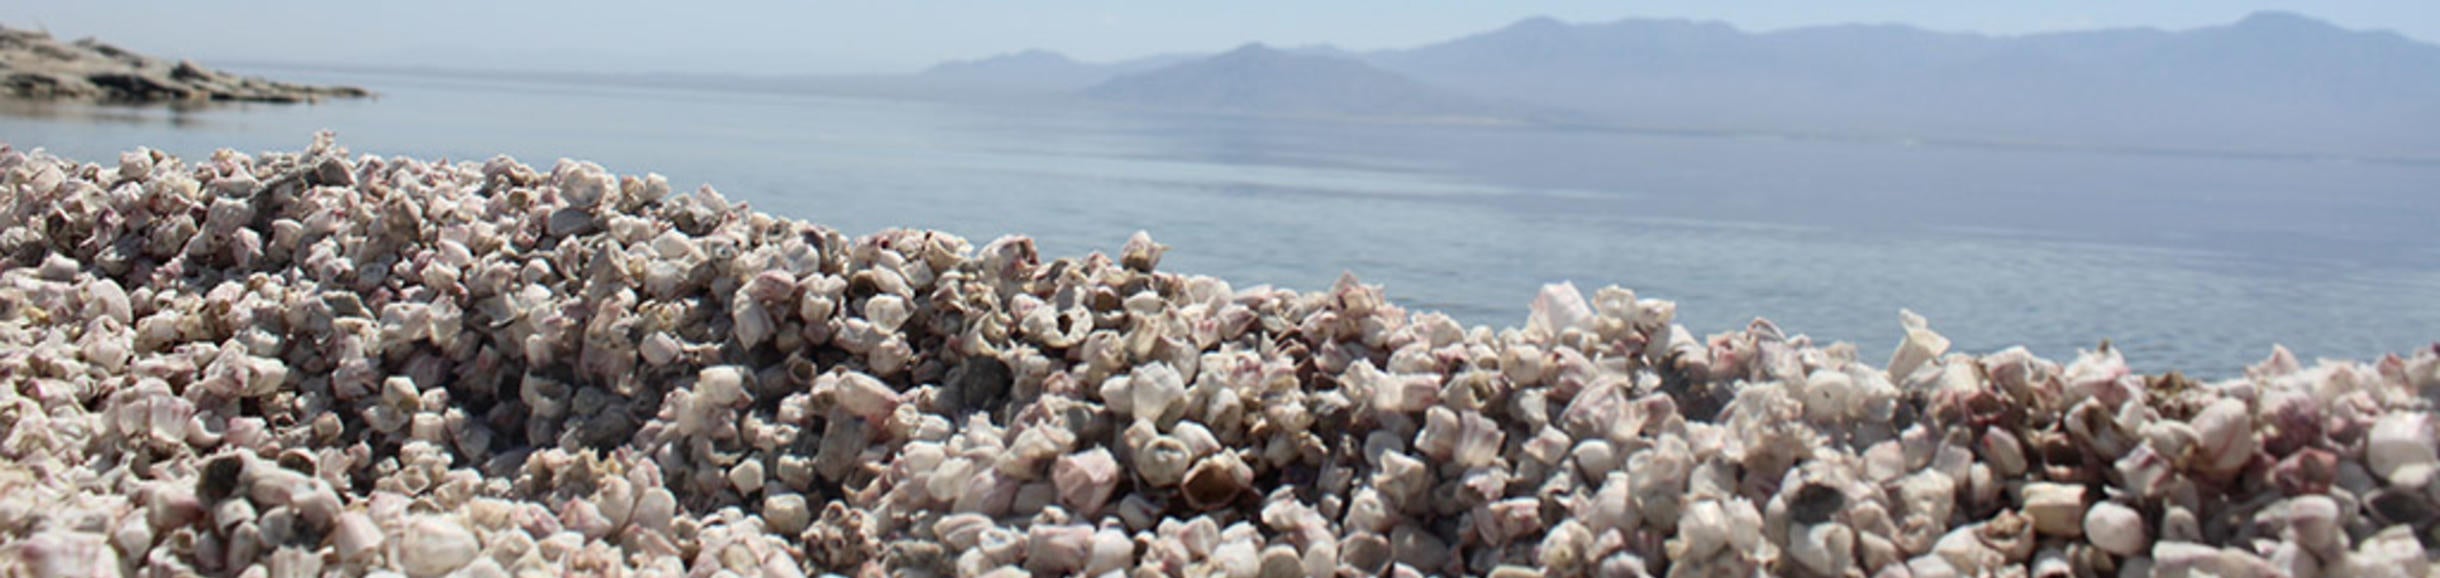 Closeup of the gravel at the Salton Sea shore. The sea itself is in the background.